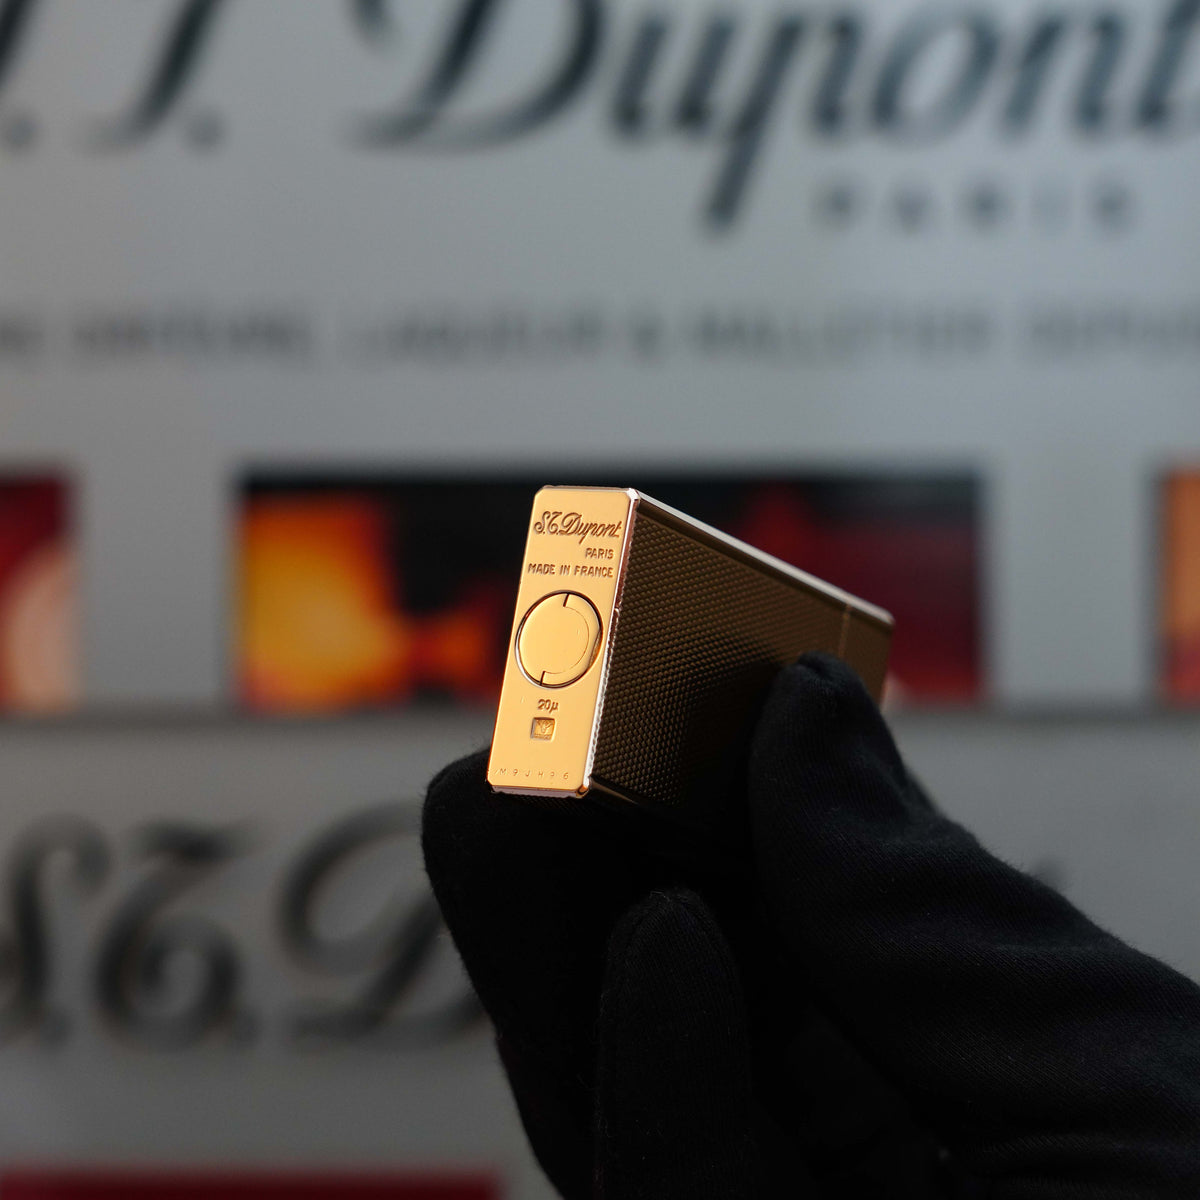 A gloved hand holds a silver and gold S.T. Dupont lighter against a blurred background, showcasing the distinguished Vintage 1970 St Dupont Micro Diamond rare Rose Gold Large Ligne 1 lighter. The S.T. Dupont brand name is visible, highlighting this vintage collector's item.